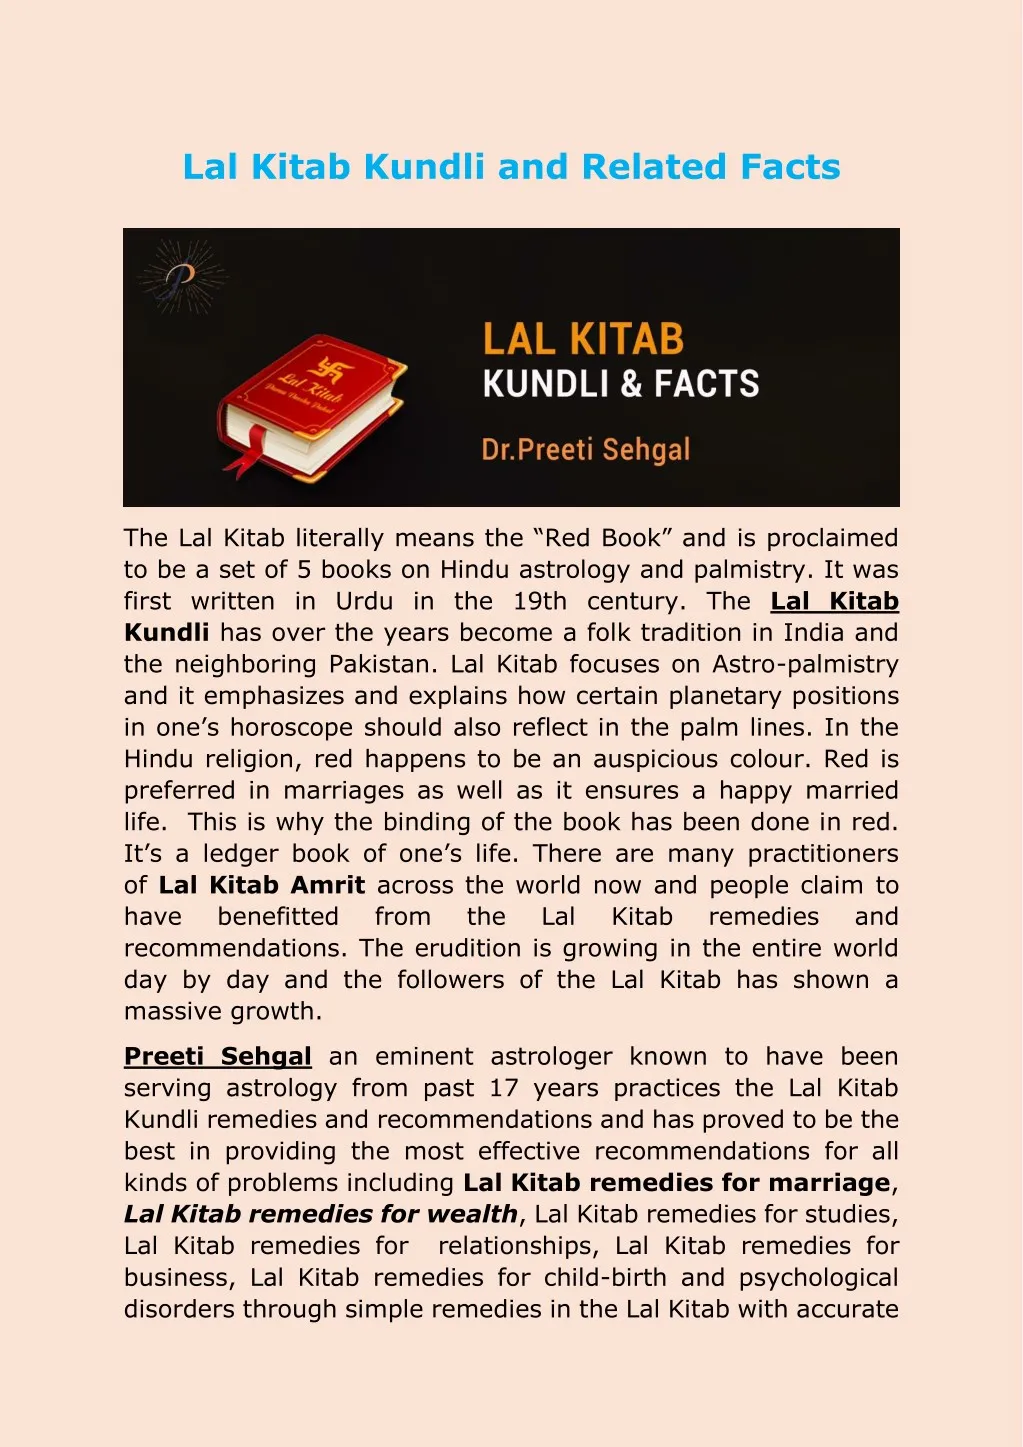 lal kitab kundli and related facts